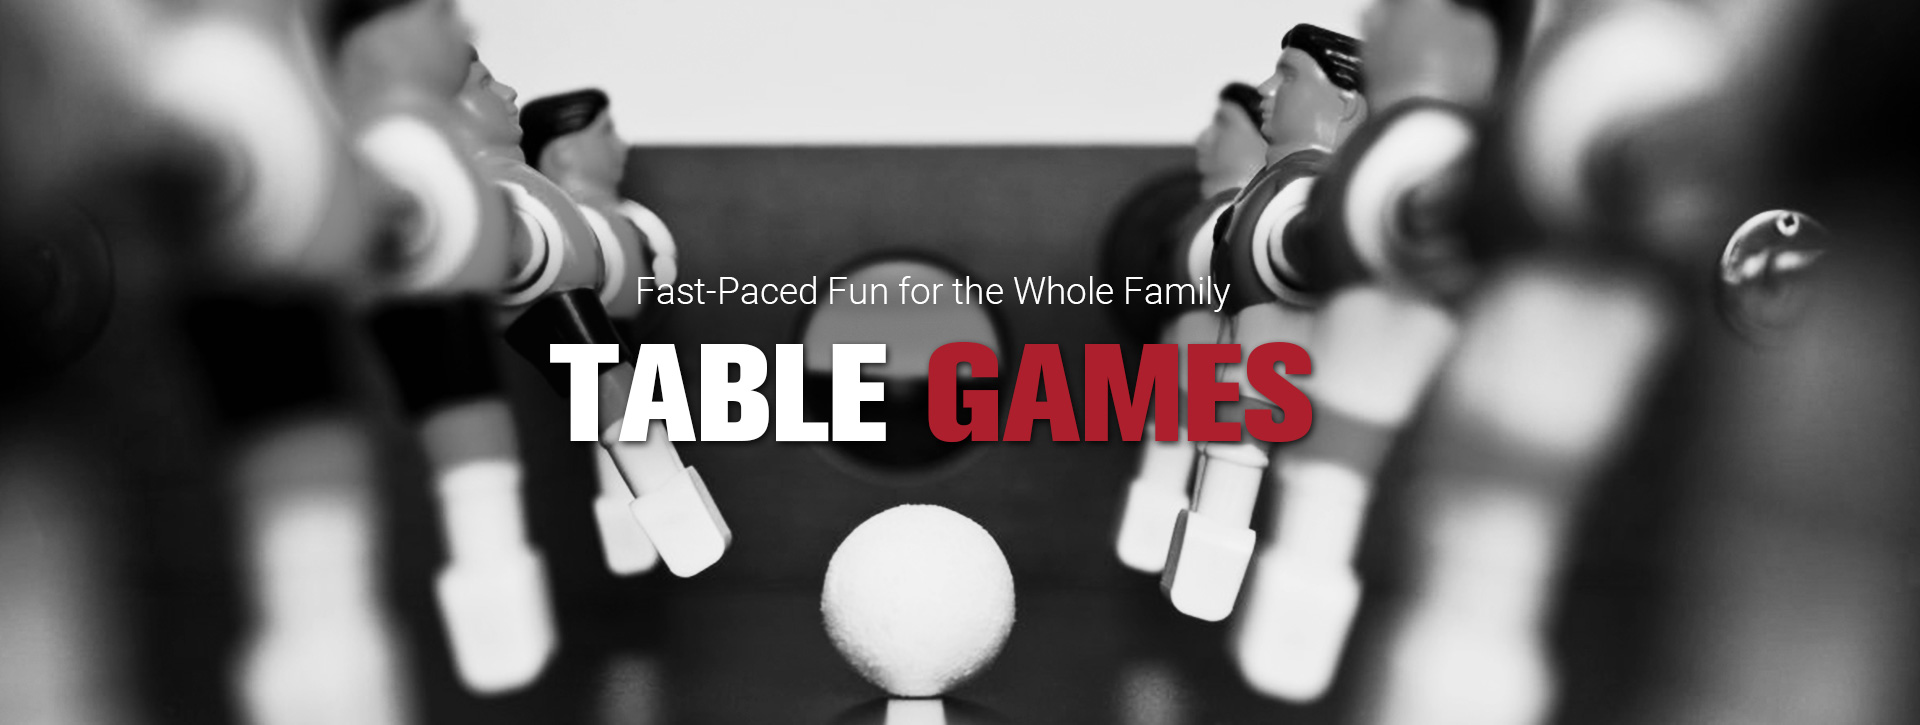 Table Games,Soccer table - Winmax